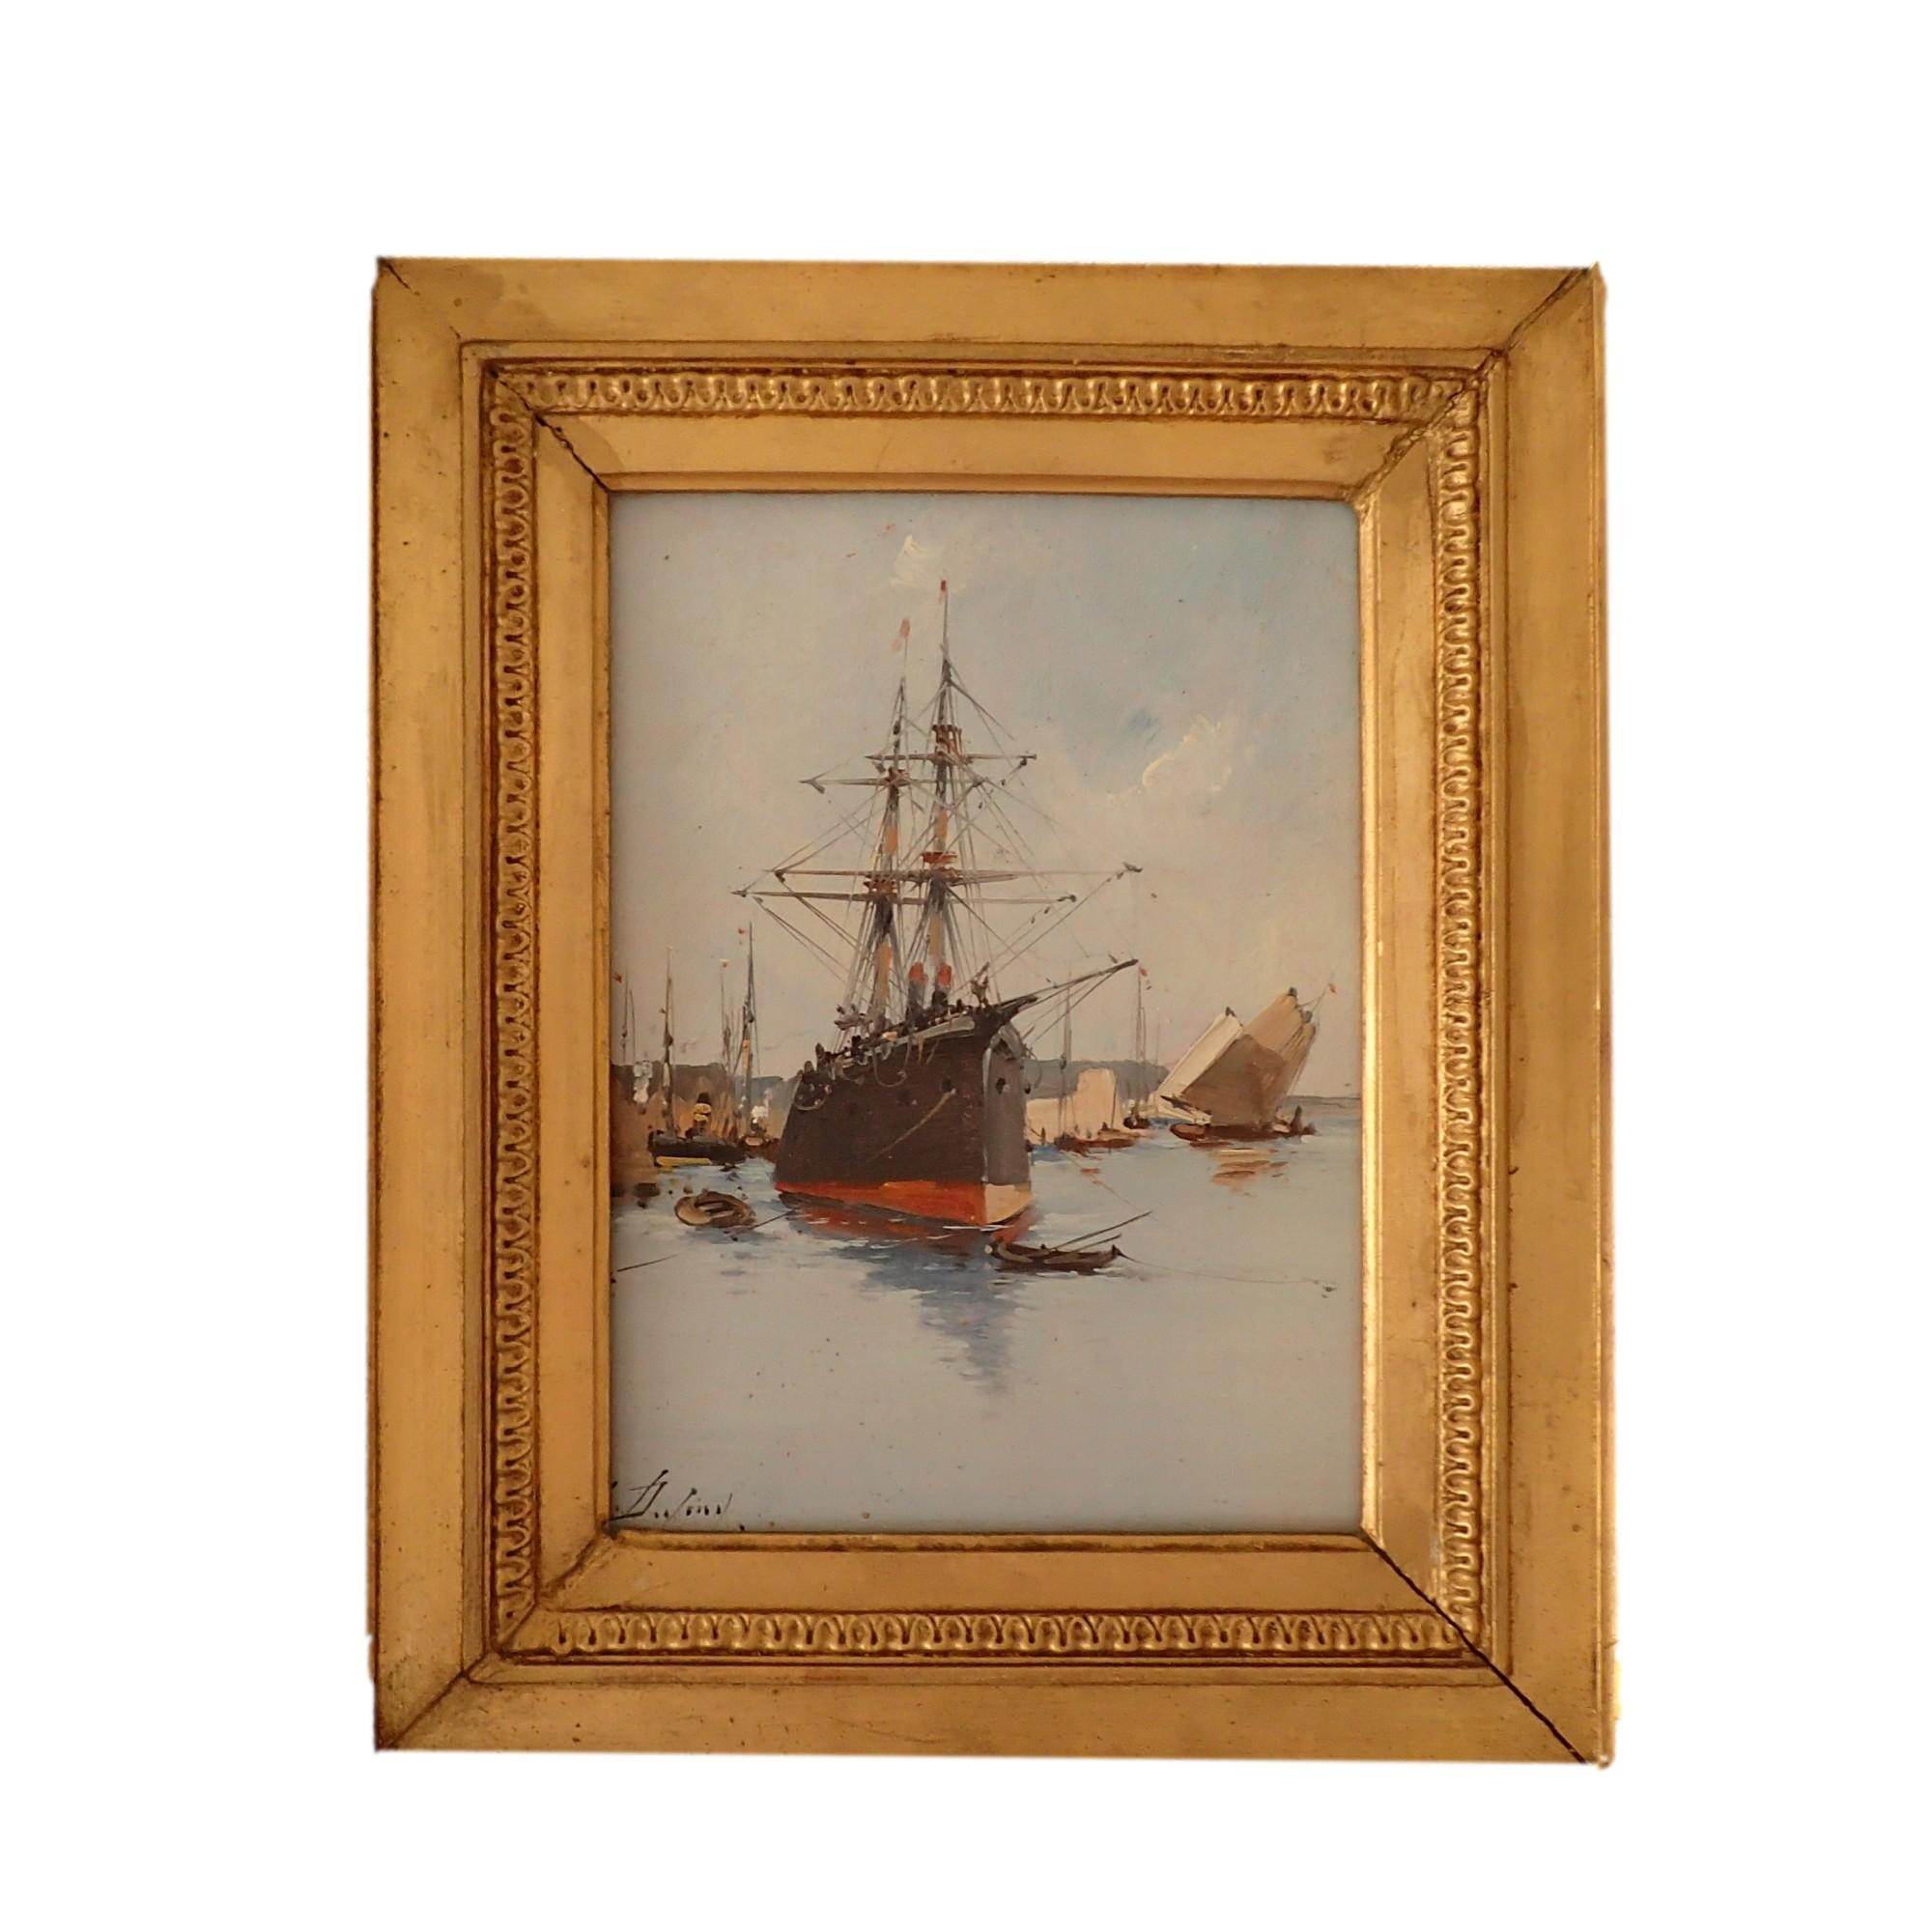 

A Lovely Oil painting of a Cargo ship and a Sailboat in Normandy by Eugène Galien-Laloue under the pseudonym L. Dupuy

Eugène Galien-Laloue depicts here a two masted cargo ship and a sailboat at anchor in a harbor in Normandy, under the pseudonym